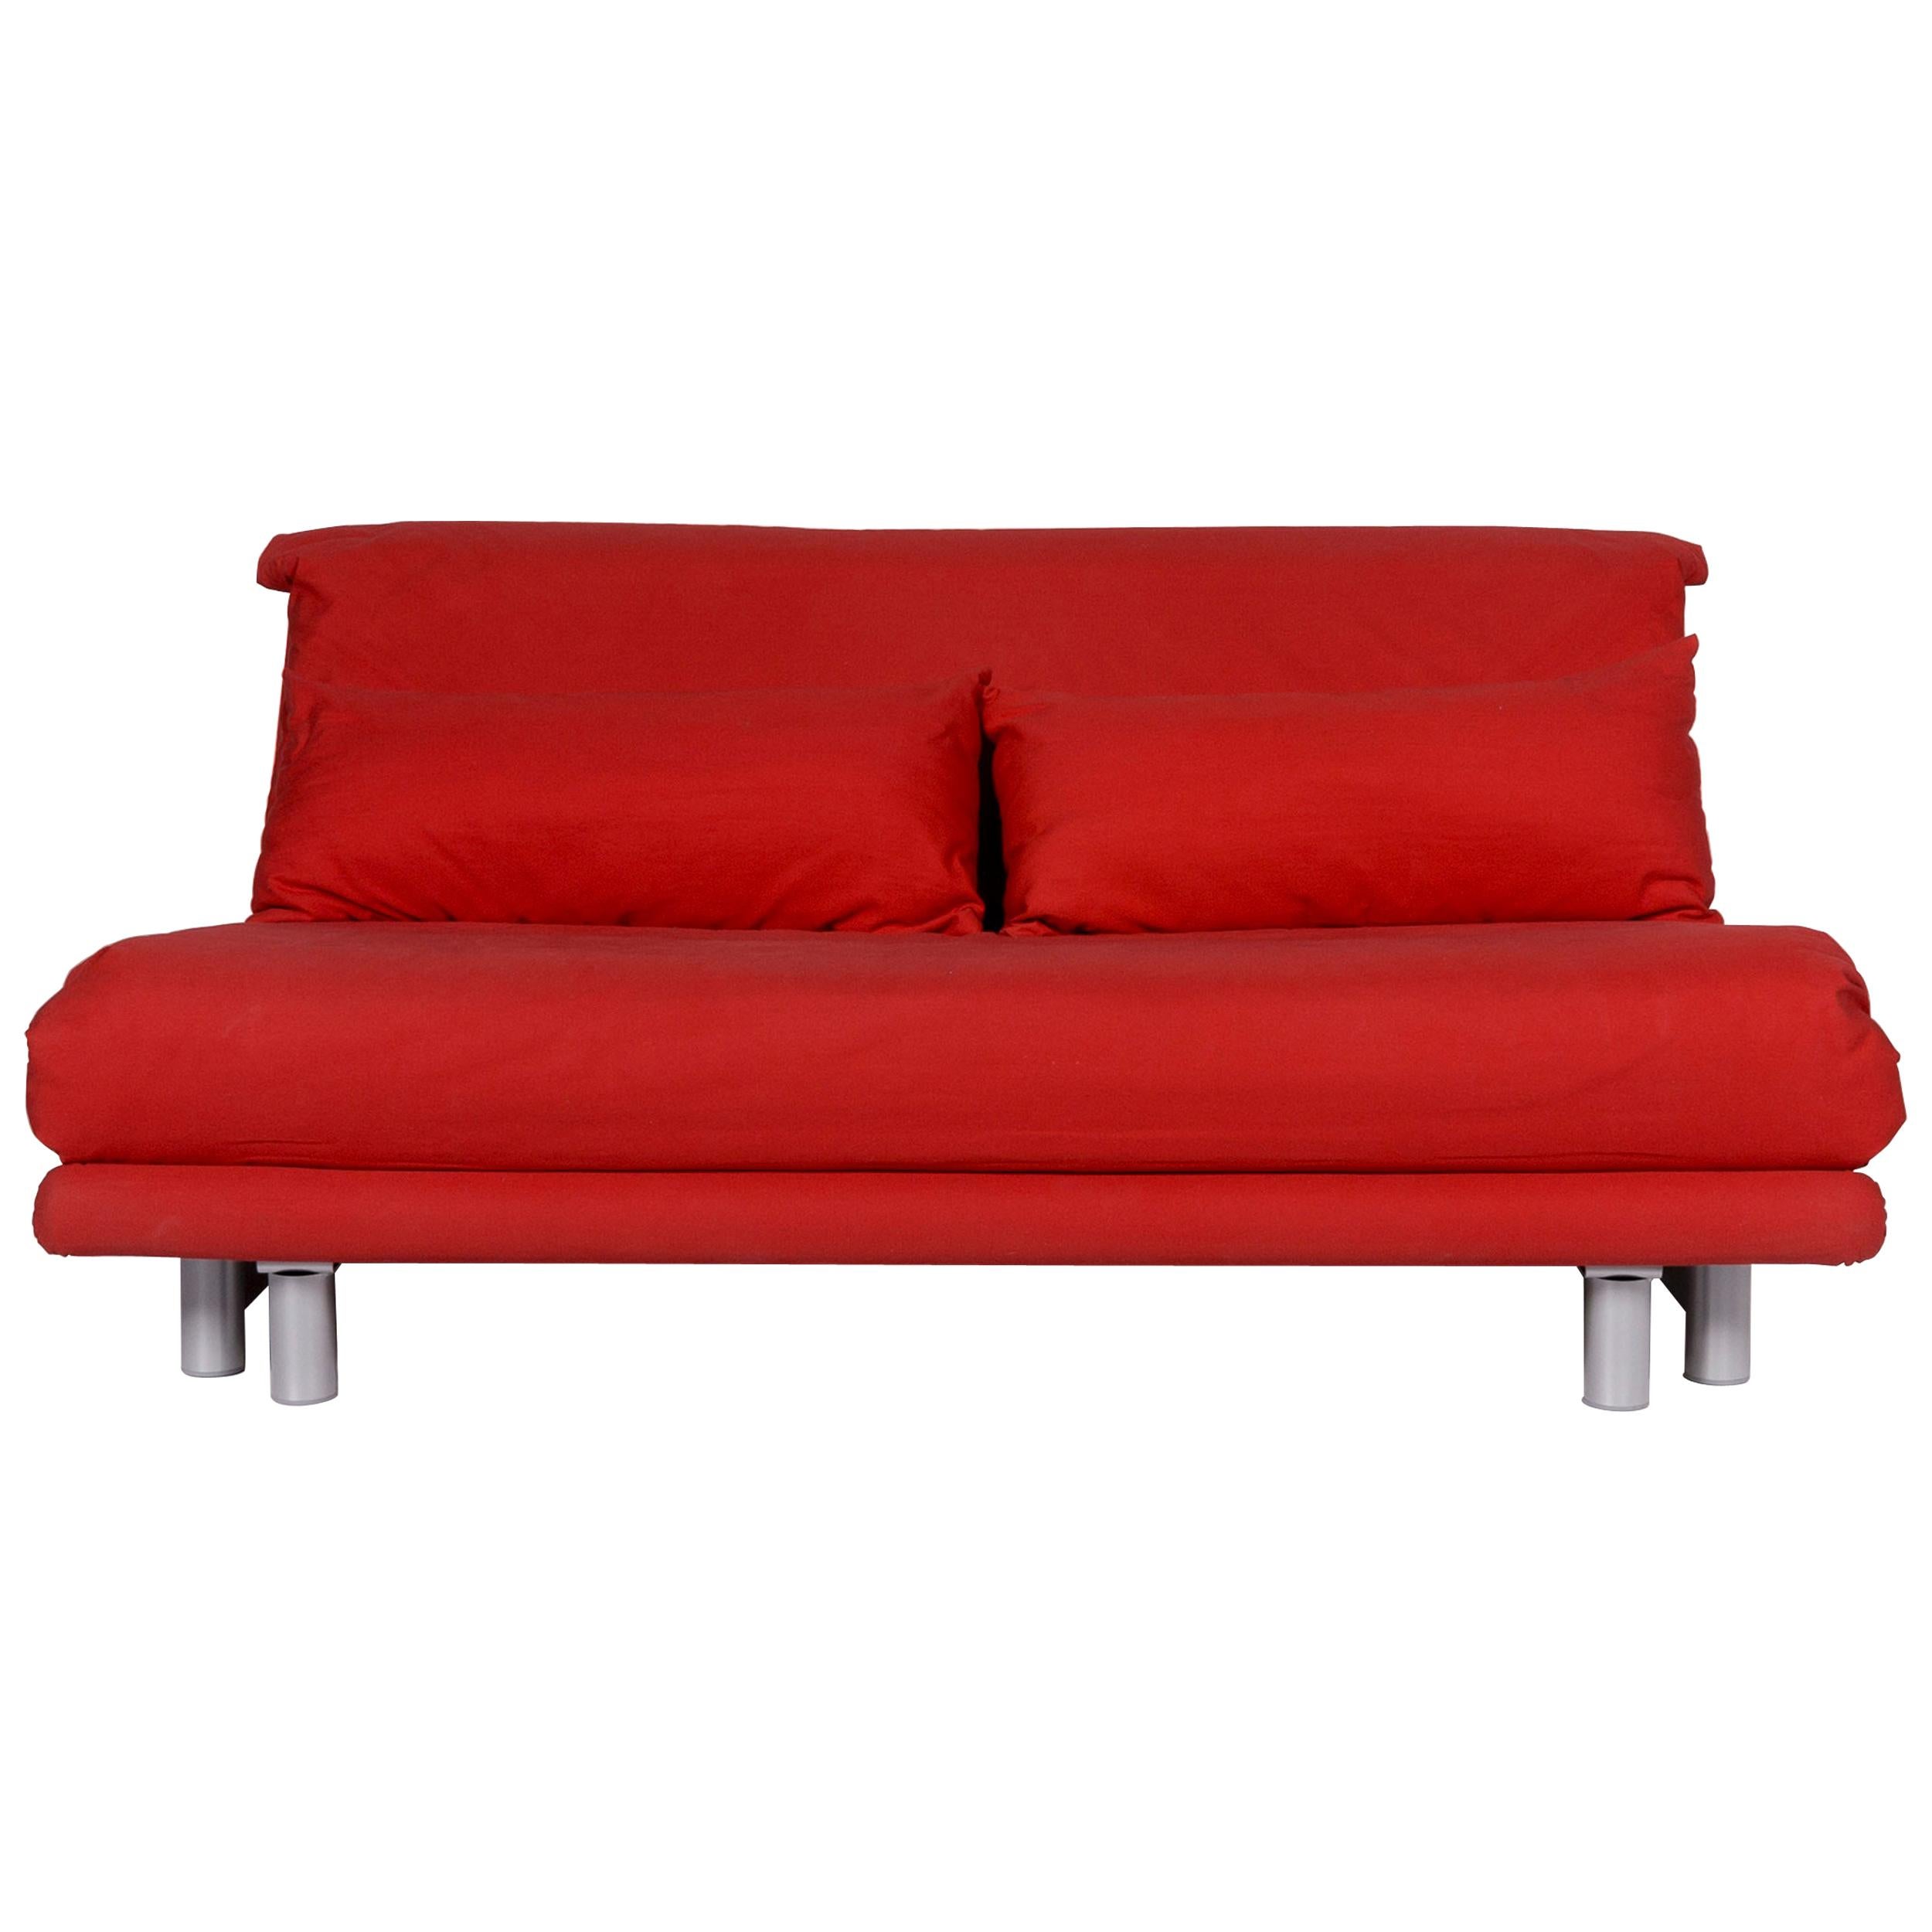 Ligne Roset Multy Stoff Sofa Rot Schlafsofa Schlaffunktion Funktion Couch For Sale